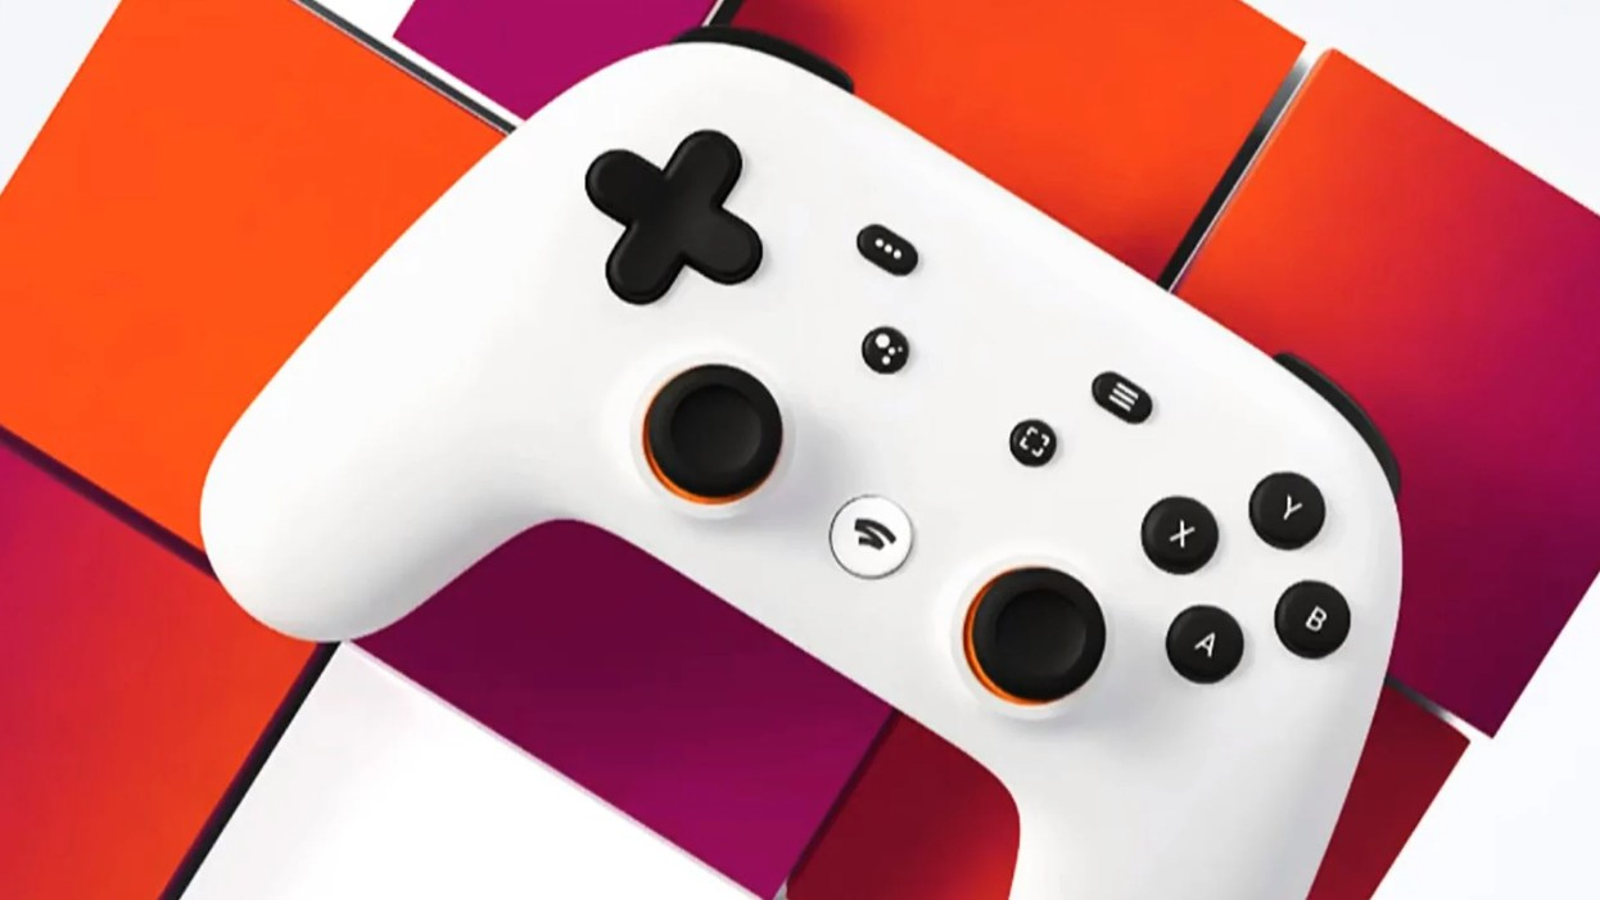 How the Stadia Controller works in Bluetooth mode